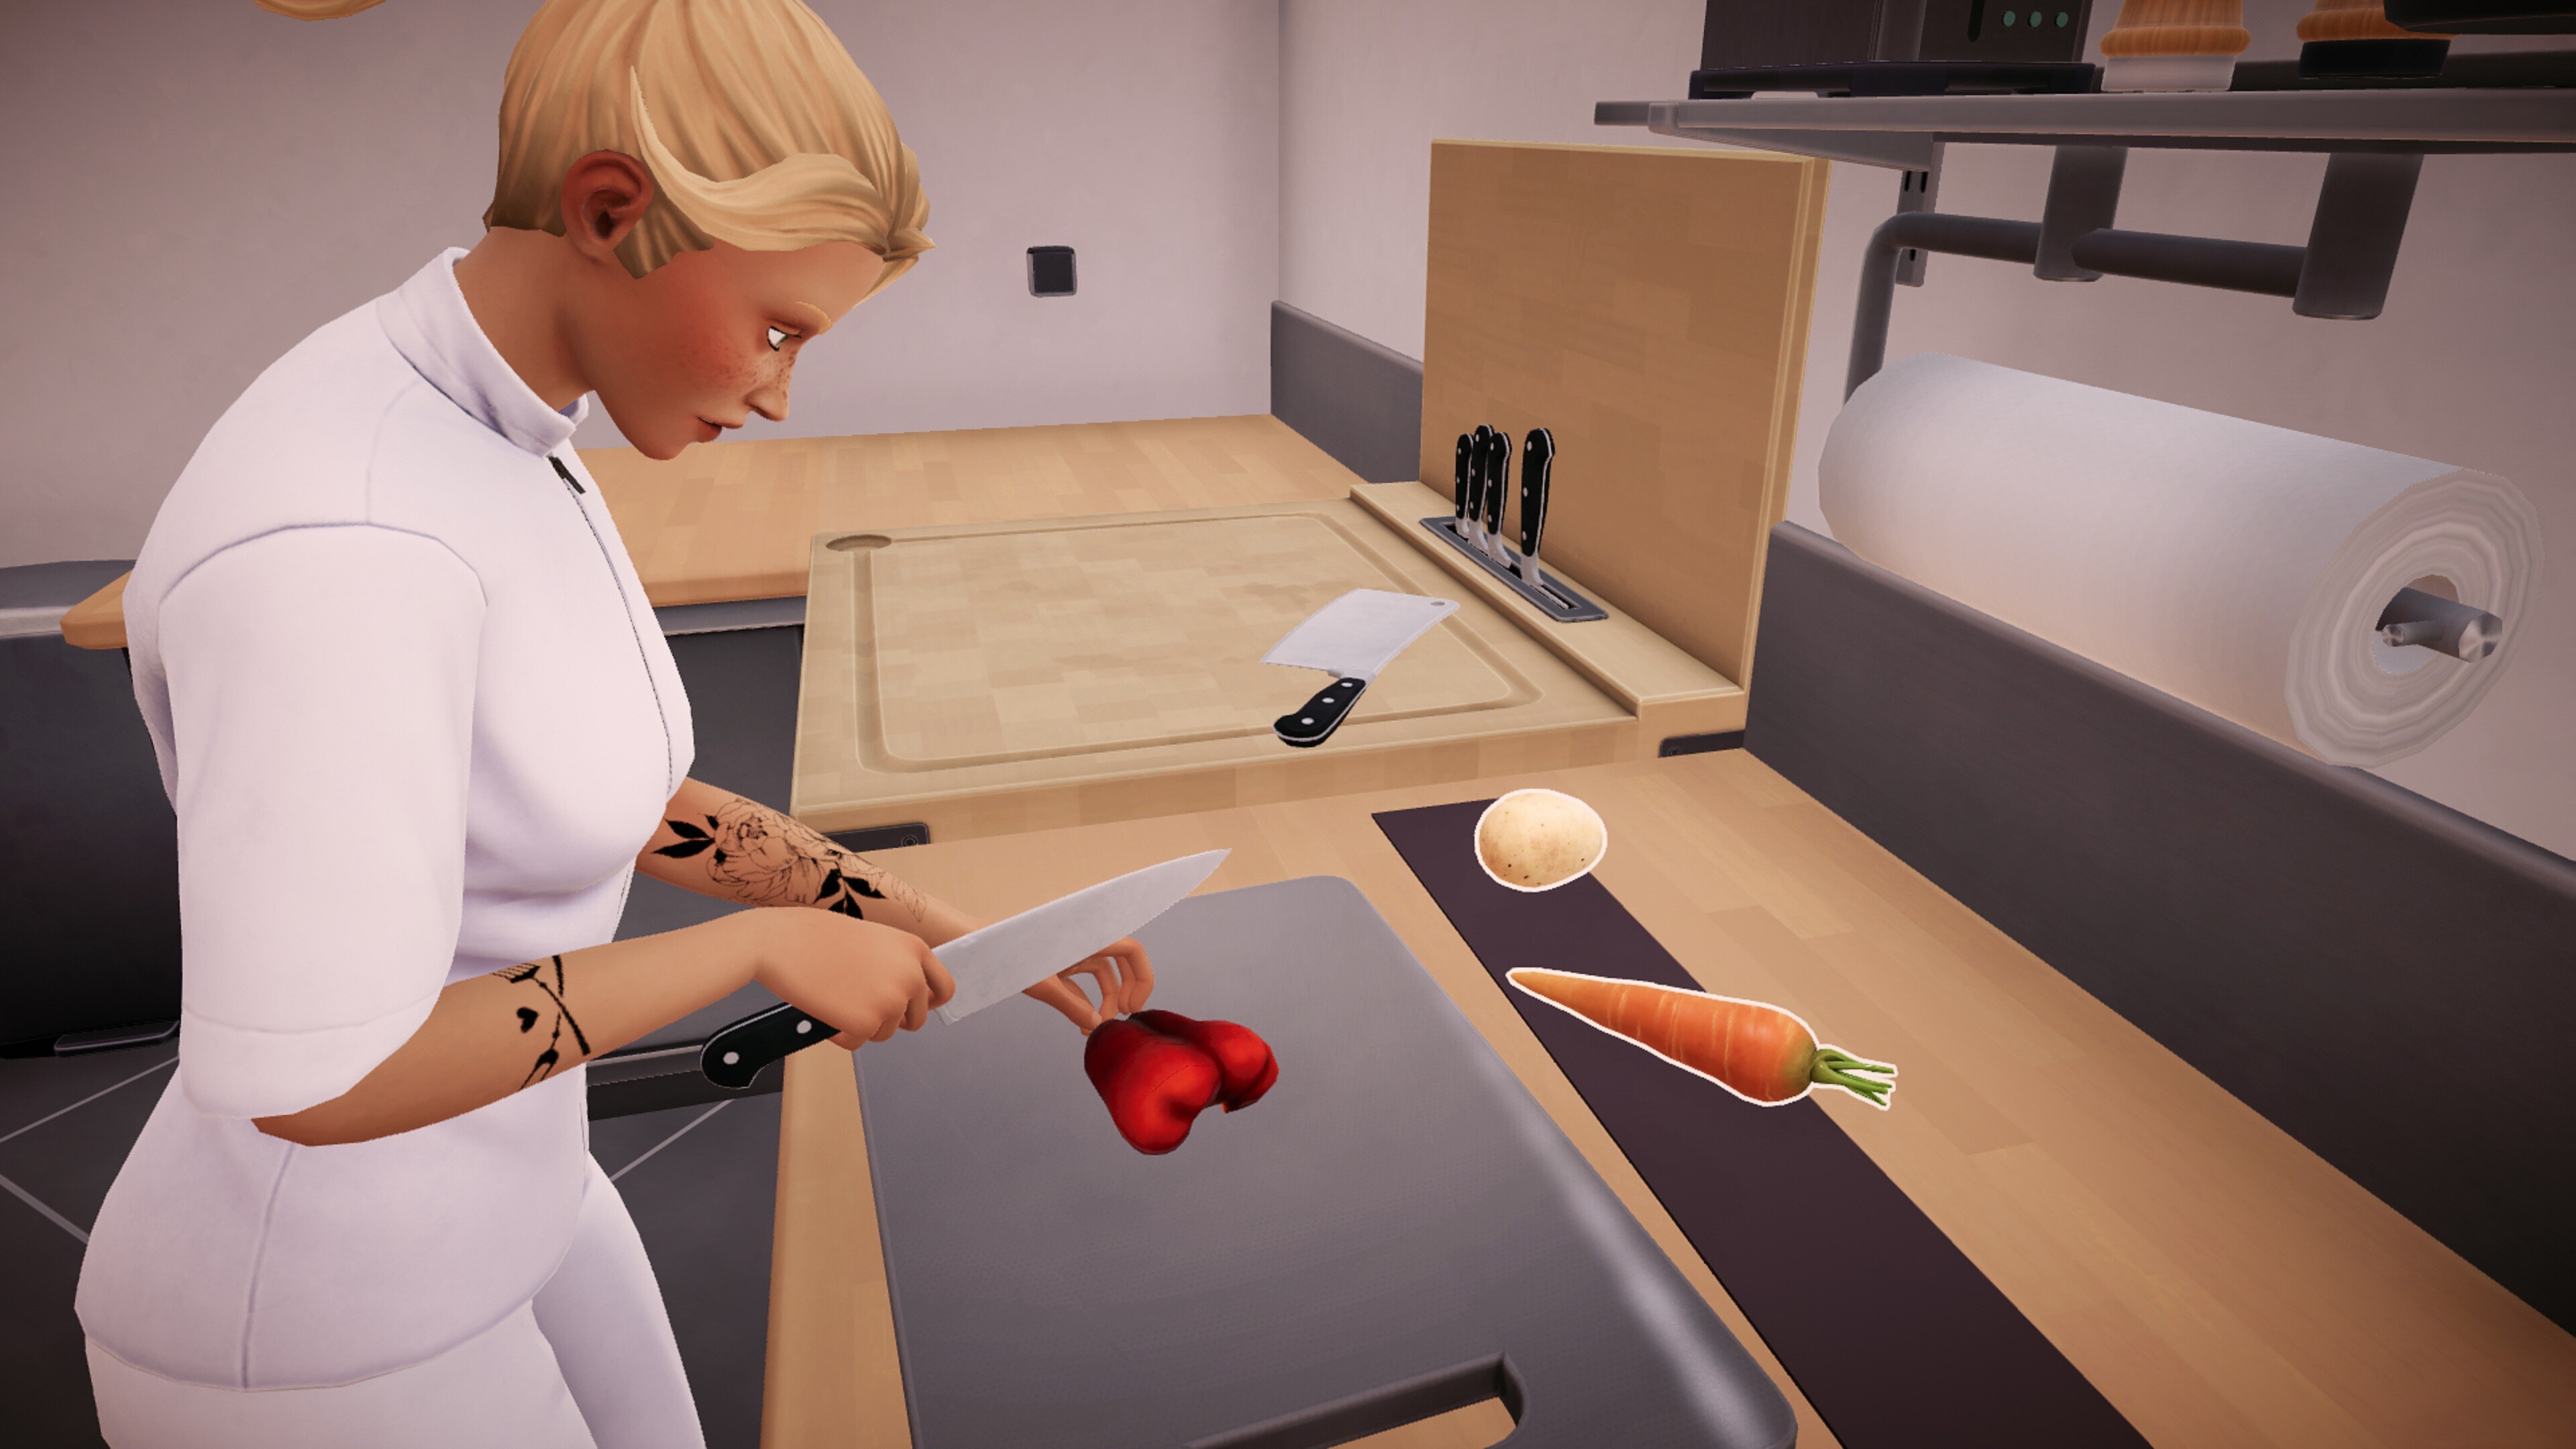 Chef Life: A Restaurant Simulator Free Download for PC